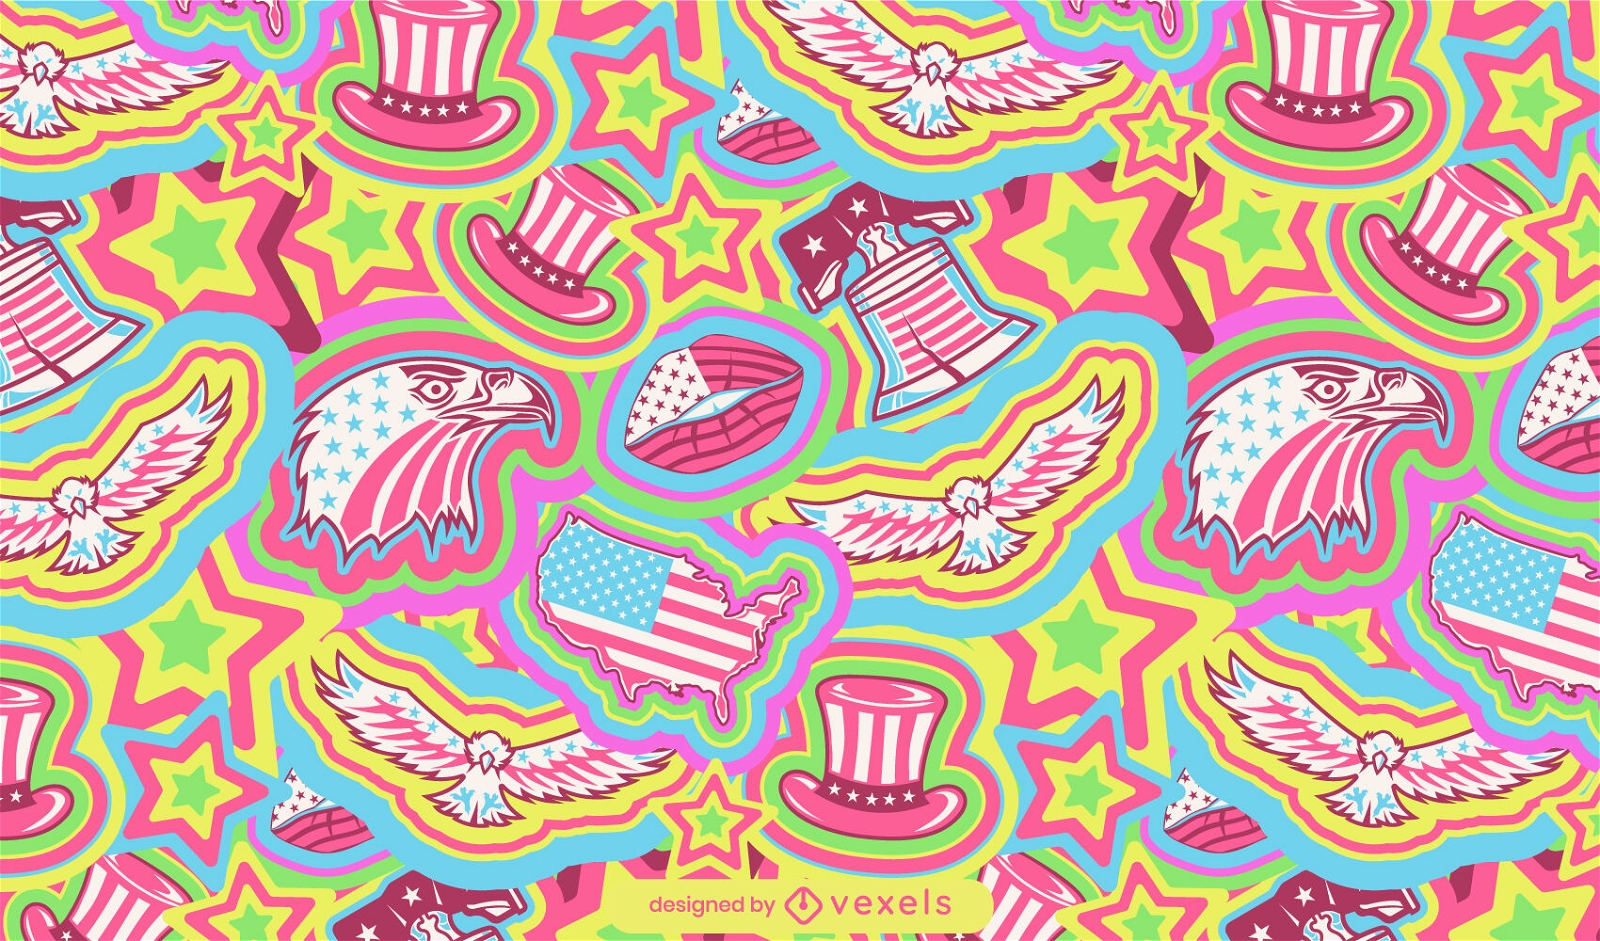 Psychedelic american flag pattern design